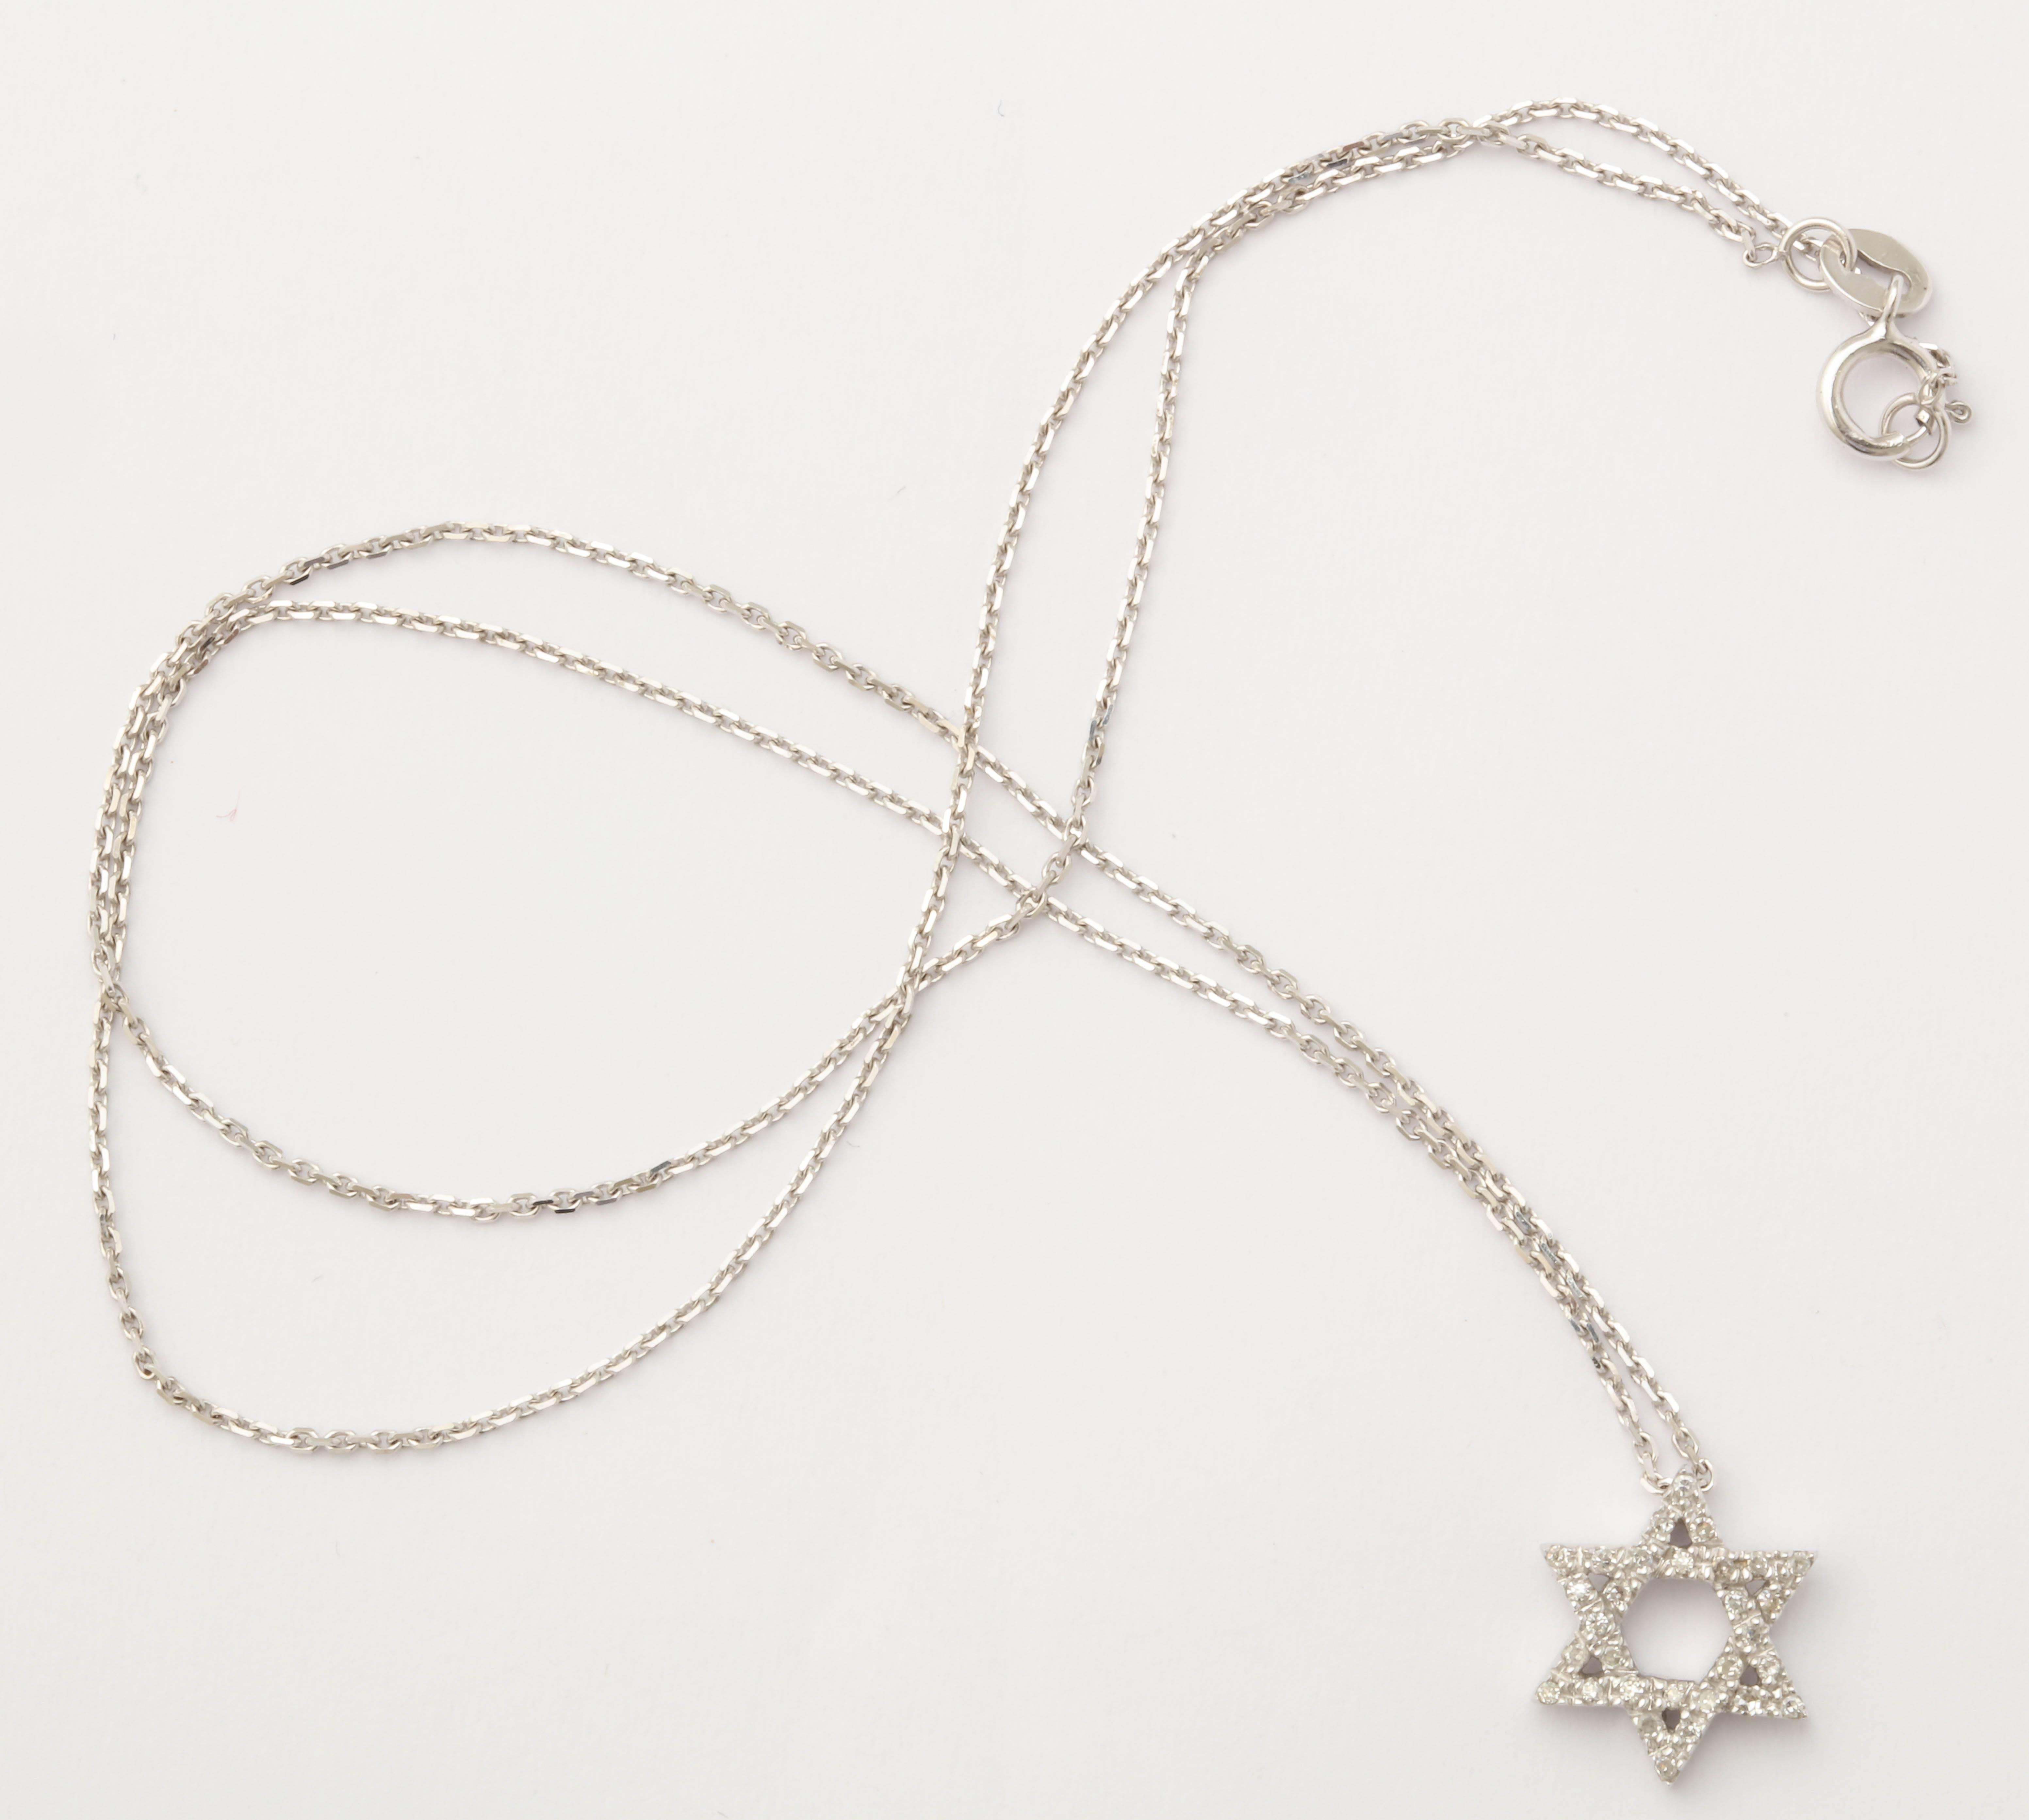 This lovely 14 kt gold  Star of David is 1/2 in. across and has .52 cts white diamonds. The 14kt chain is 16 in. and is included,